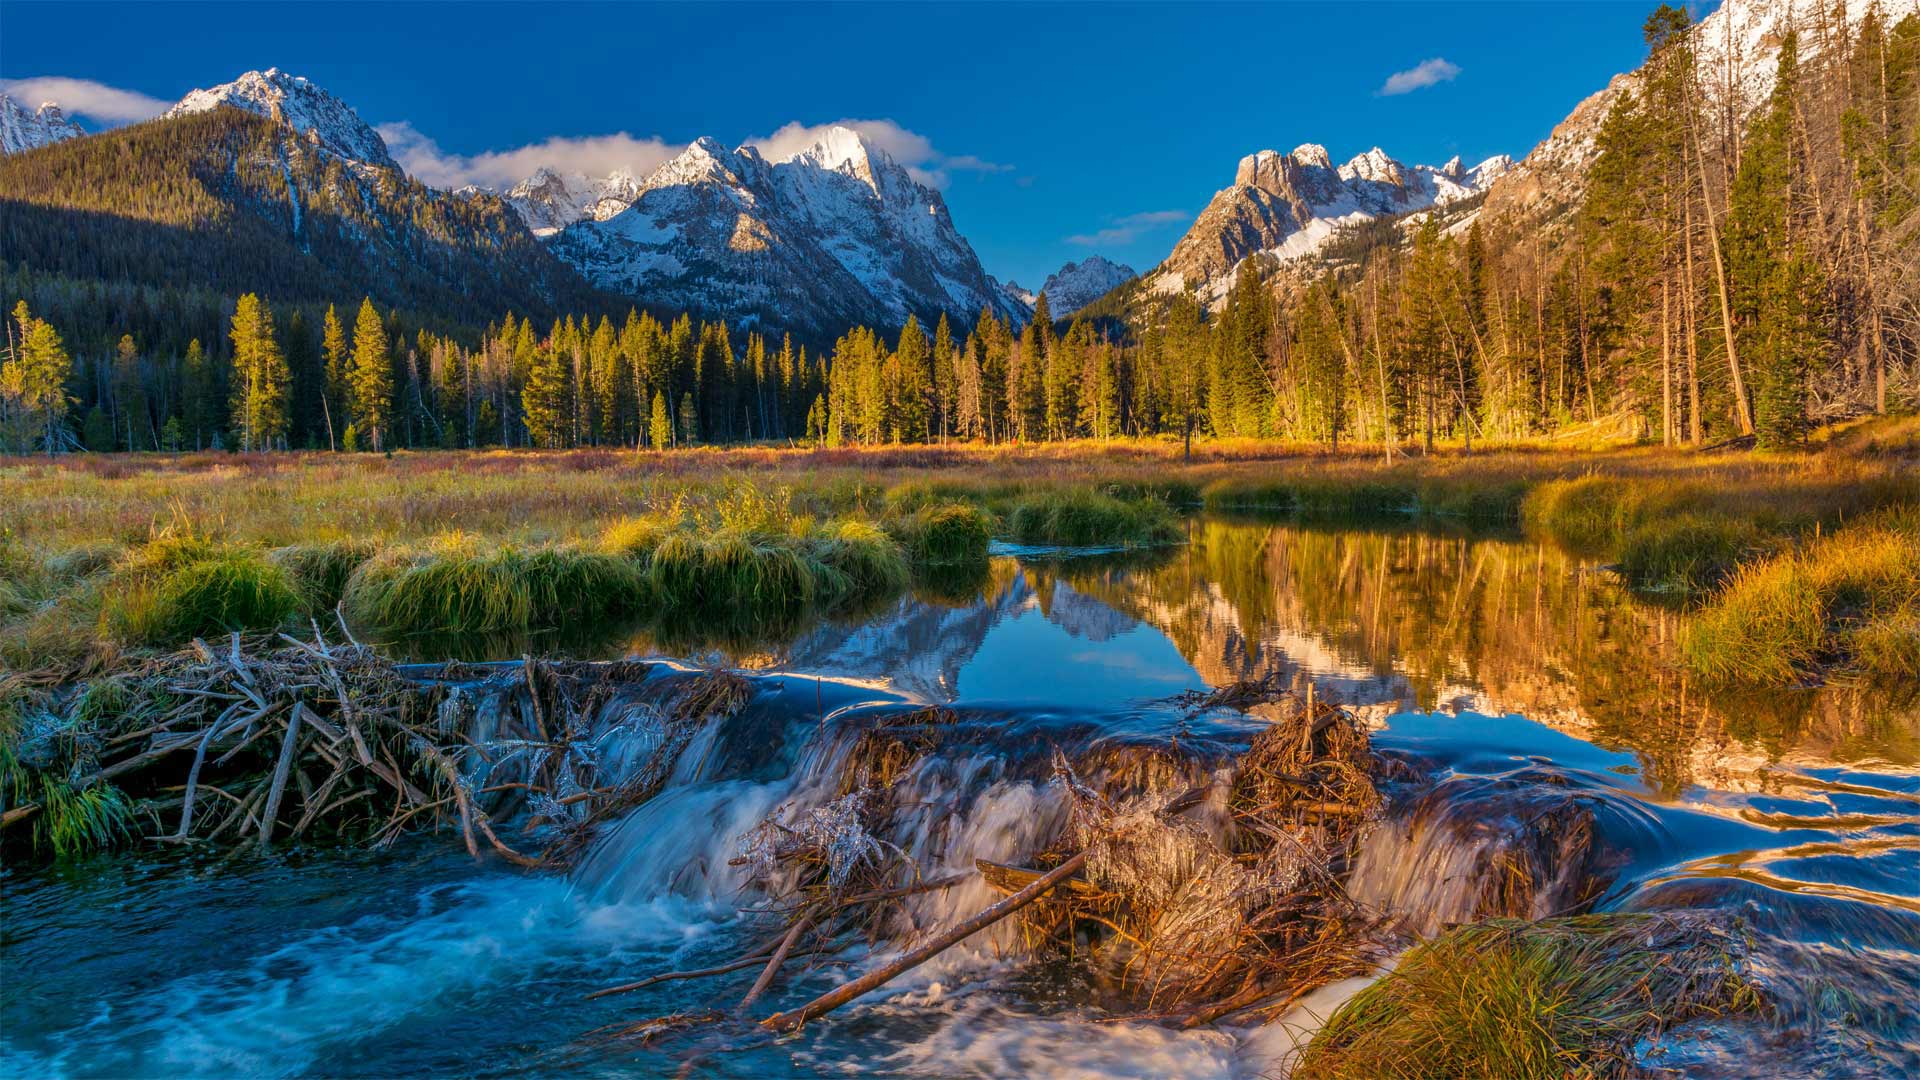 Beaver dam in the Sawtooth National Forest, Idaho - Charles Knowles/Alamy)